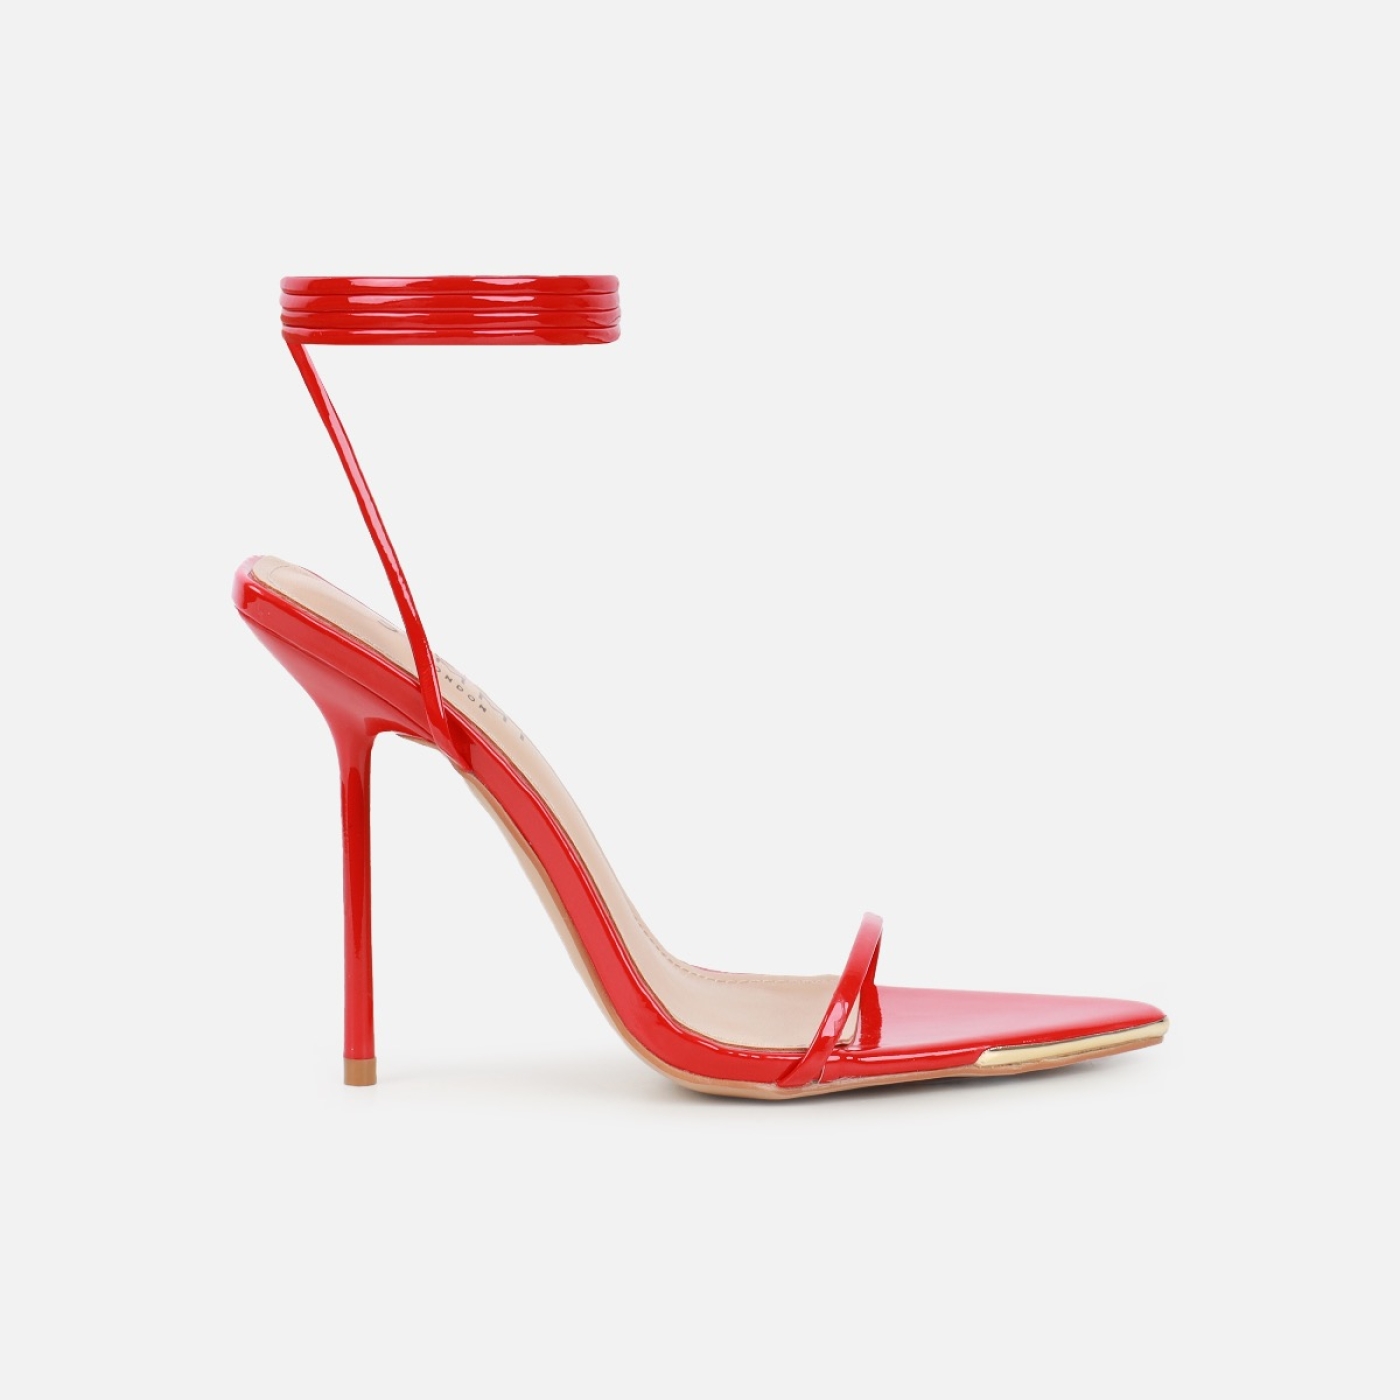 Delilahh Red Patent Tie Up Stiletto Sandals | SIMMI London